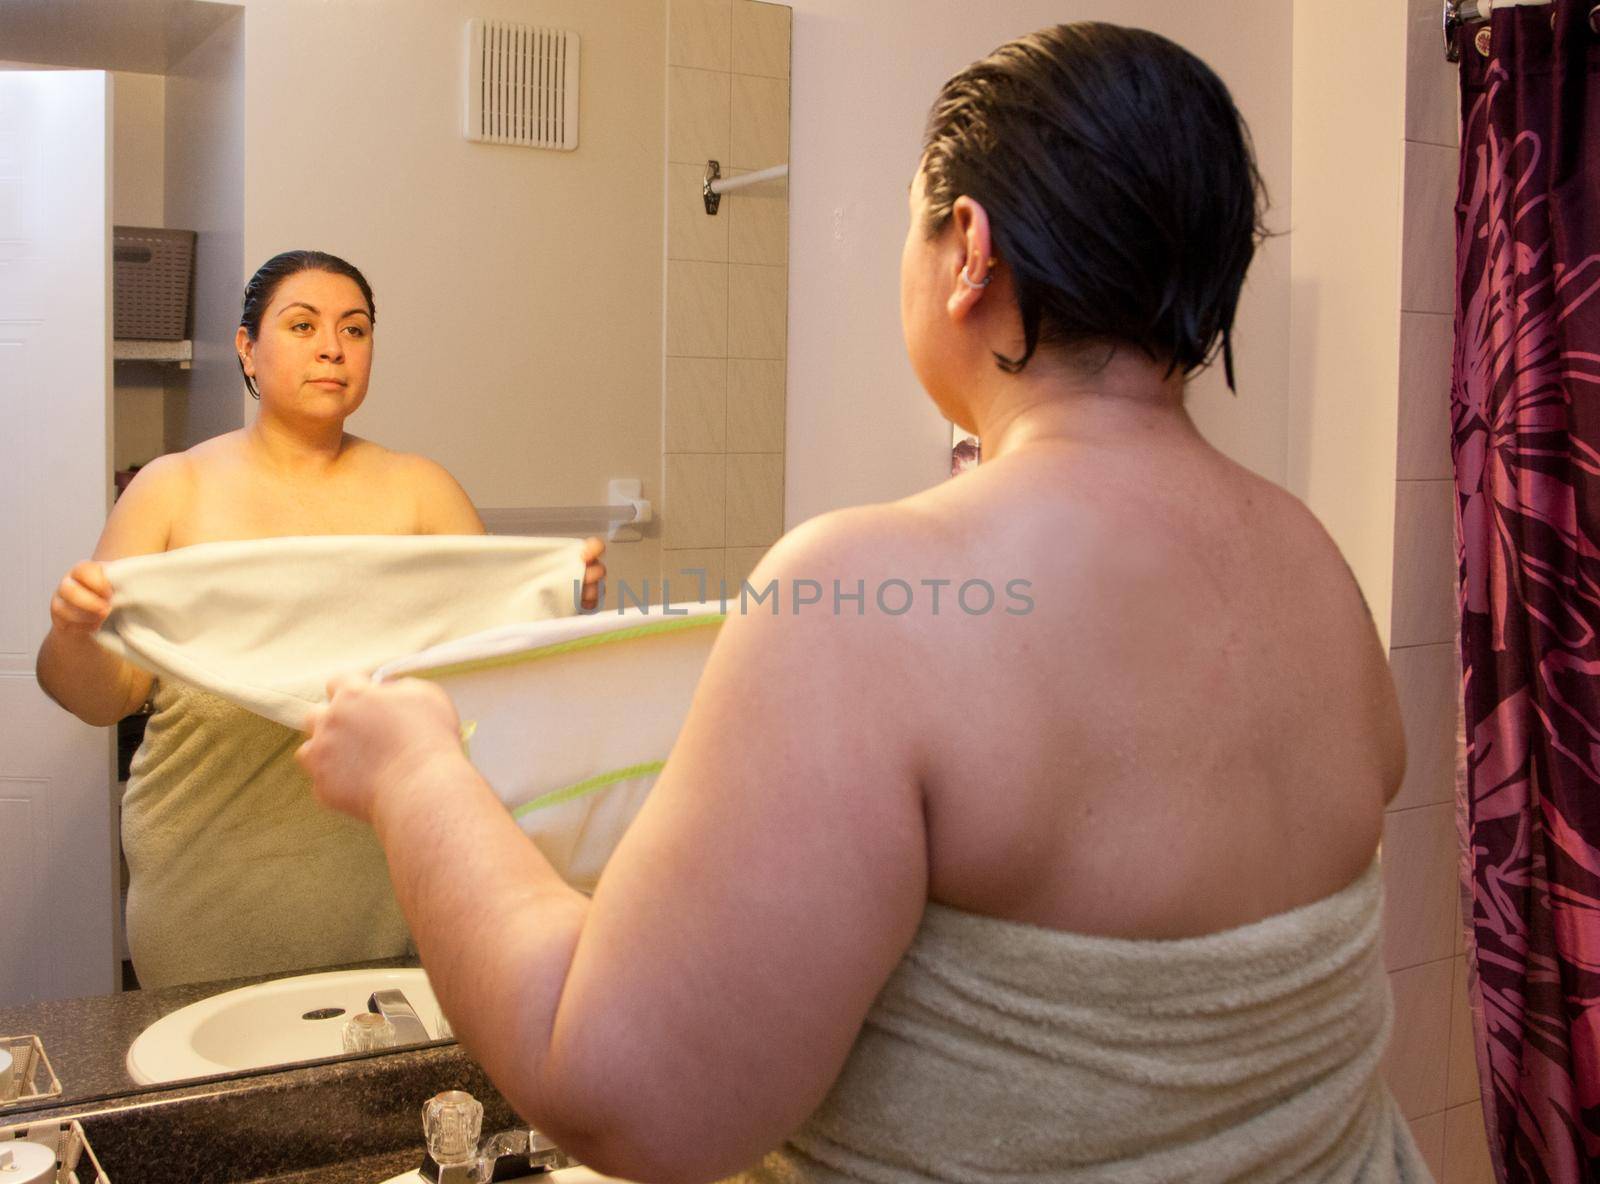 Woman stands in front of reflection as part of morning shower routine, ready to towel dry hair 